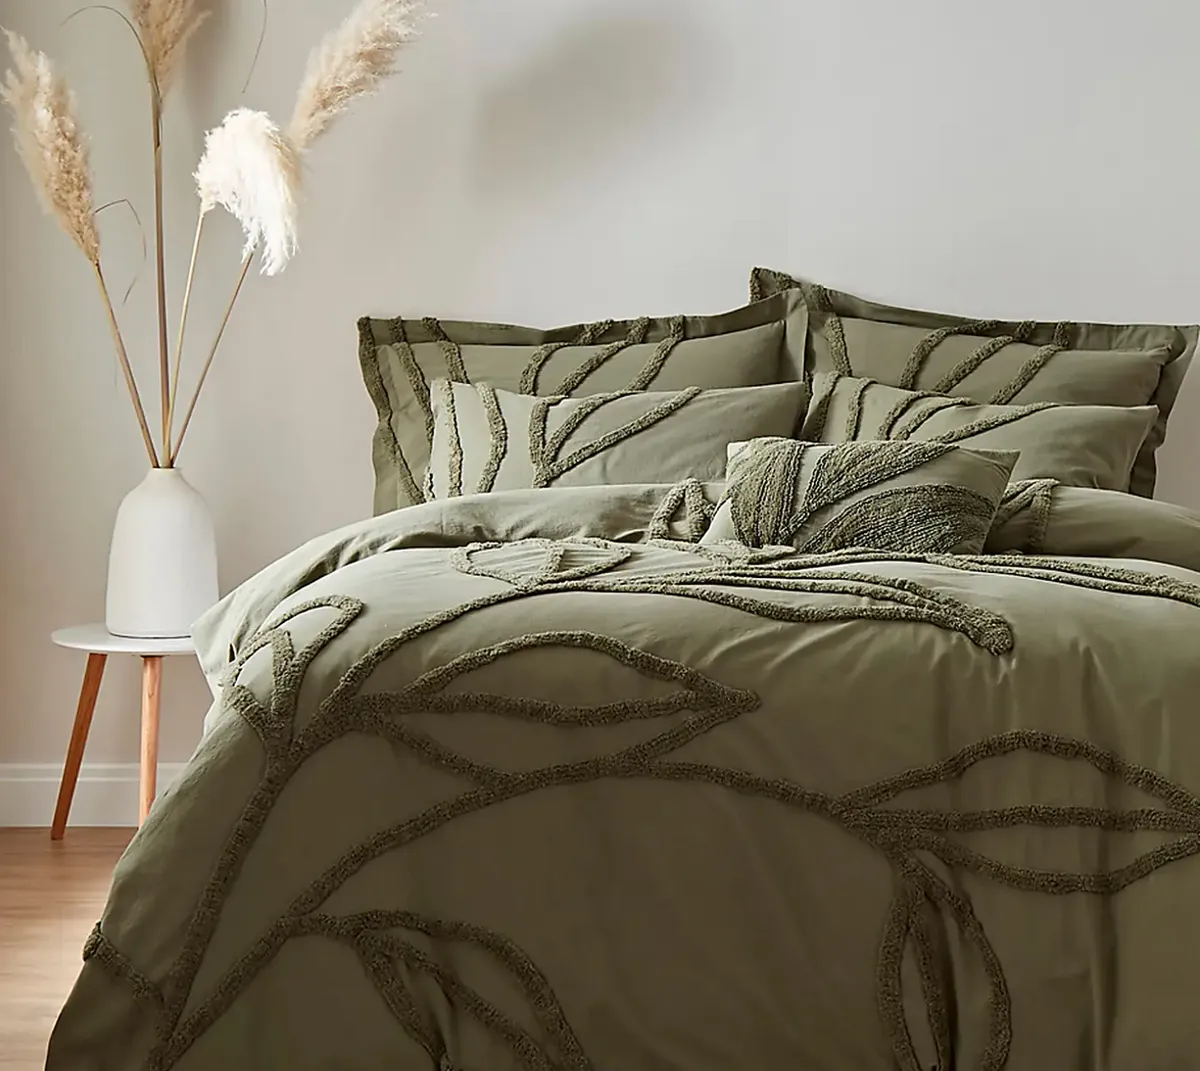 Tufted Leaf Duvet Cover and Pillowcase Set